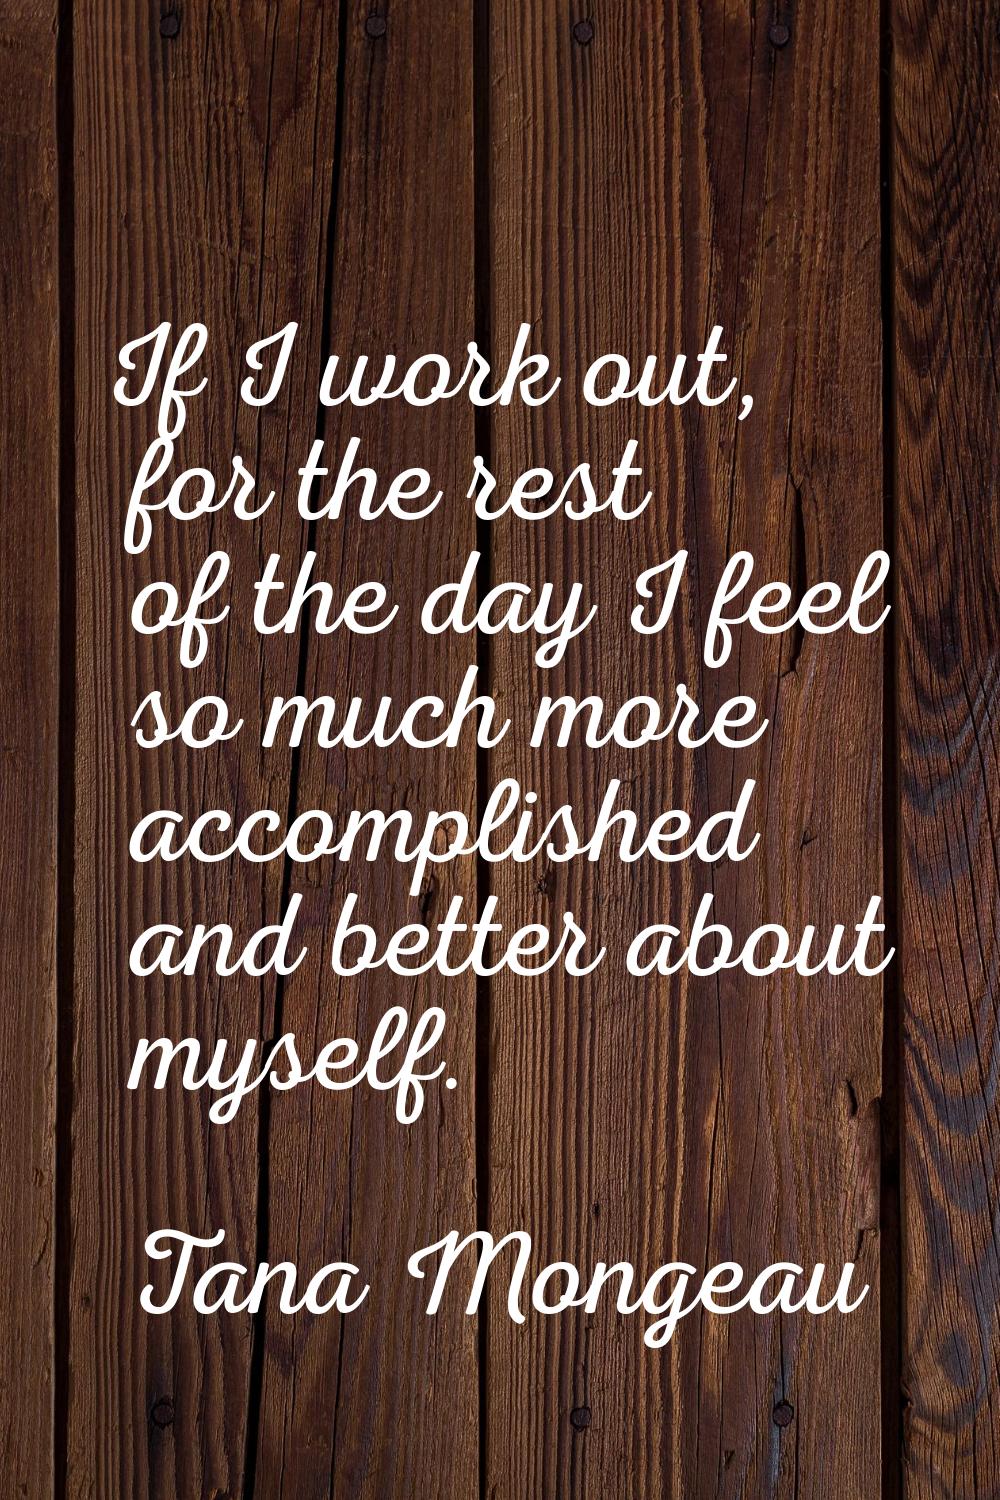 If I work out, for the rest of the day I feel so much more accomplished and better about myself.